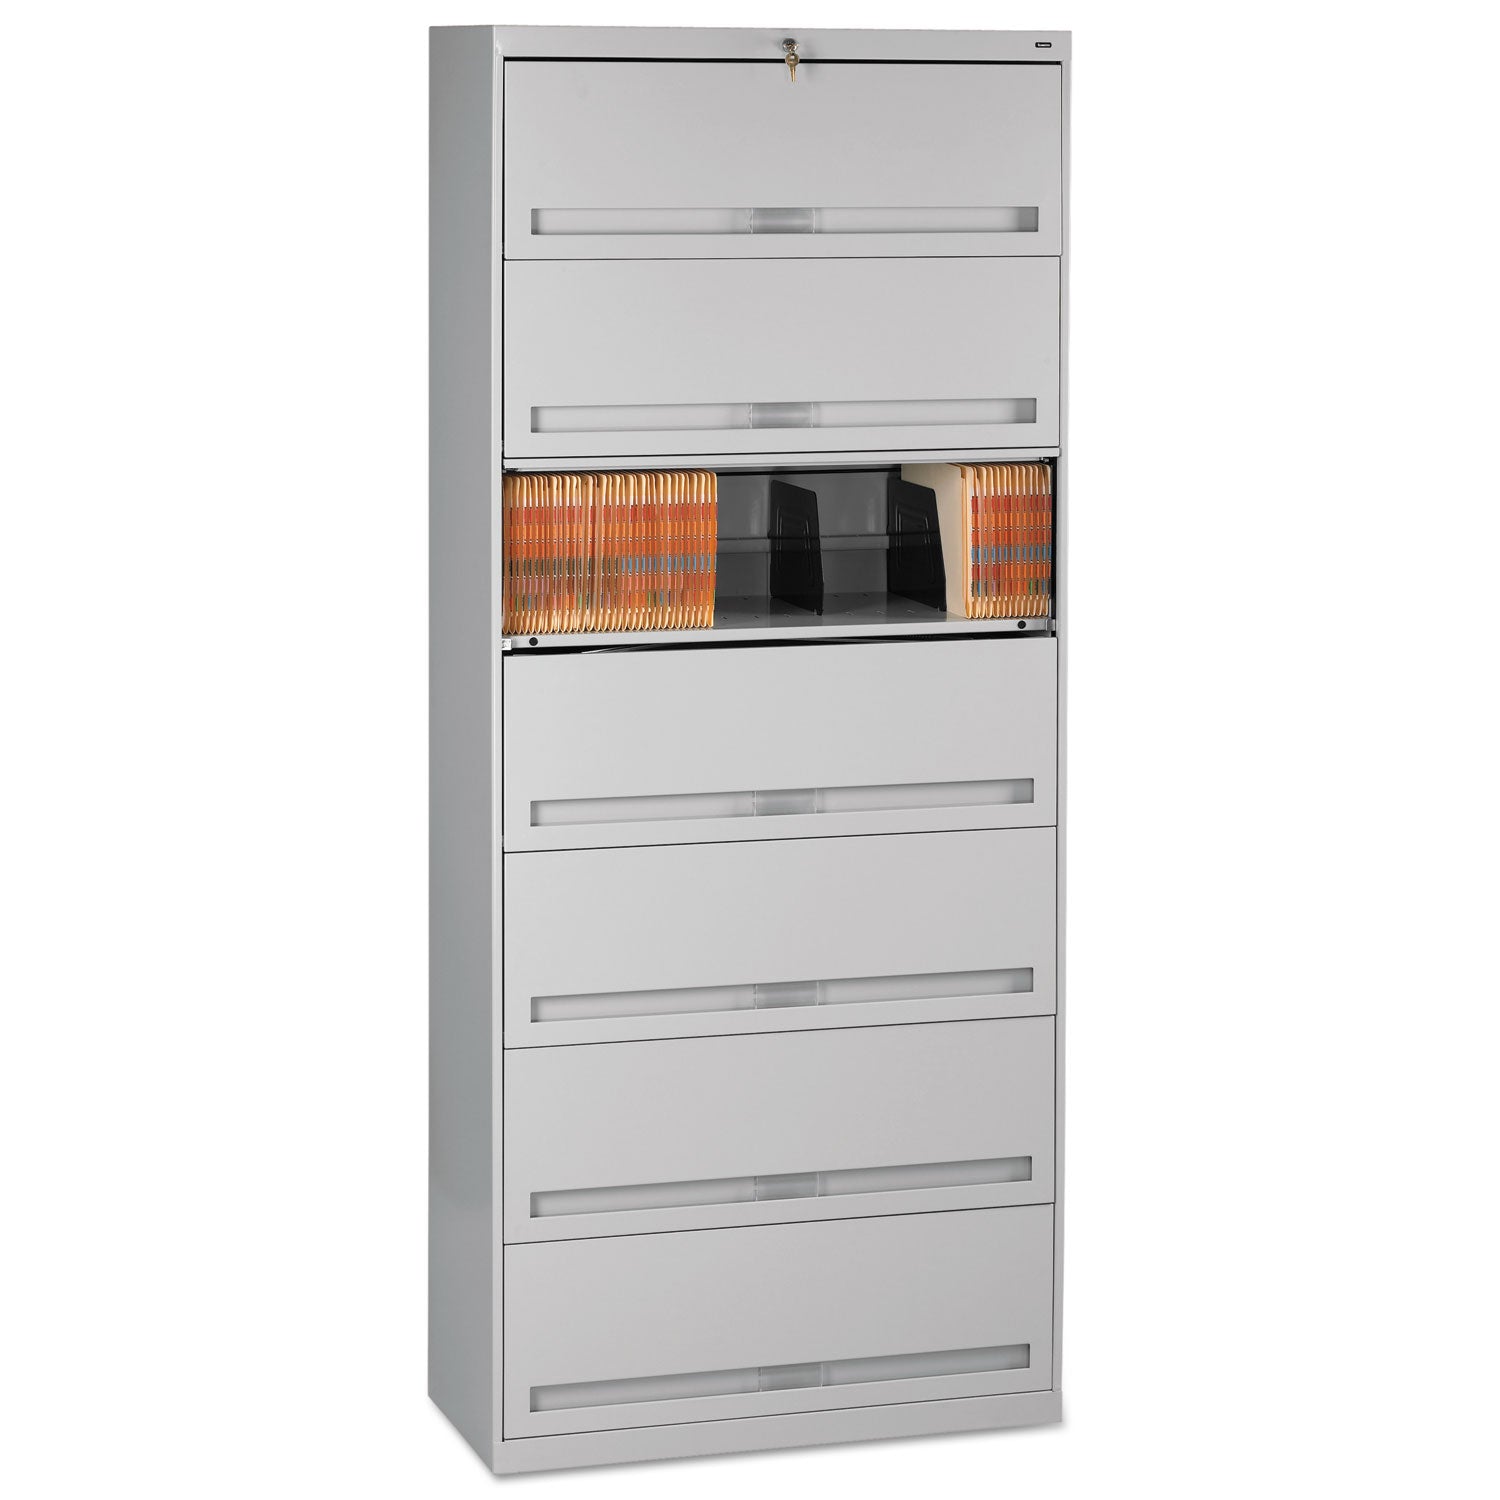 fixed-shelf-enclosed-format-lateral-file-for-end-tab-folders-7-legal-letter-file-shelves-light-gray-36-x-165-x-87_tnnfs371llgy - 1